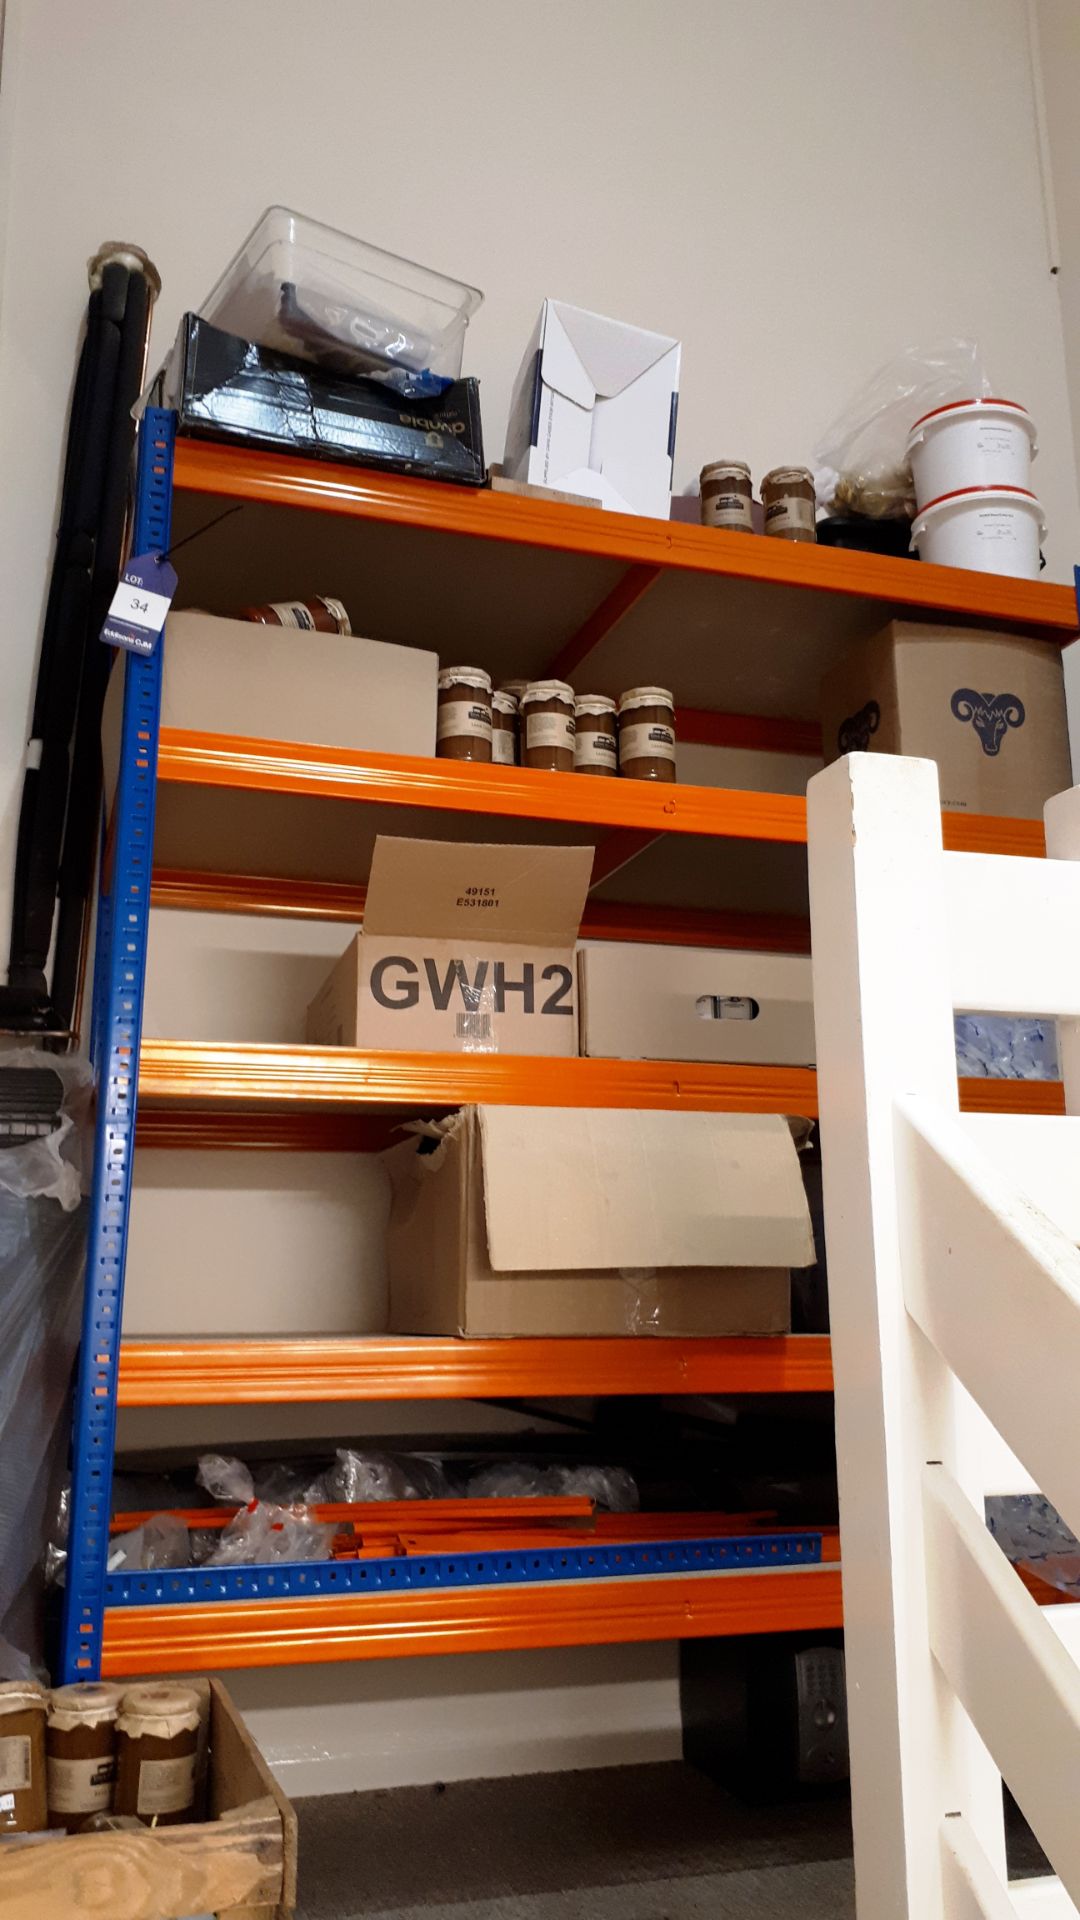 2 x Boltless shelving units, and contents